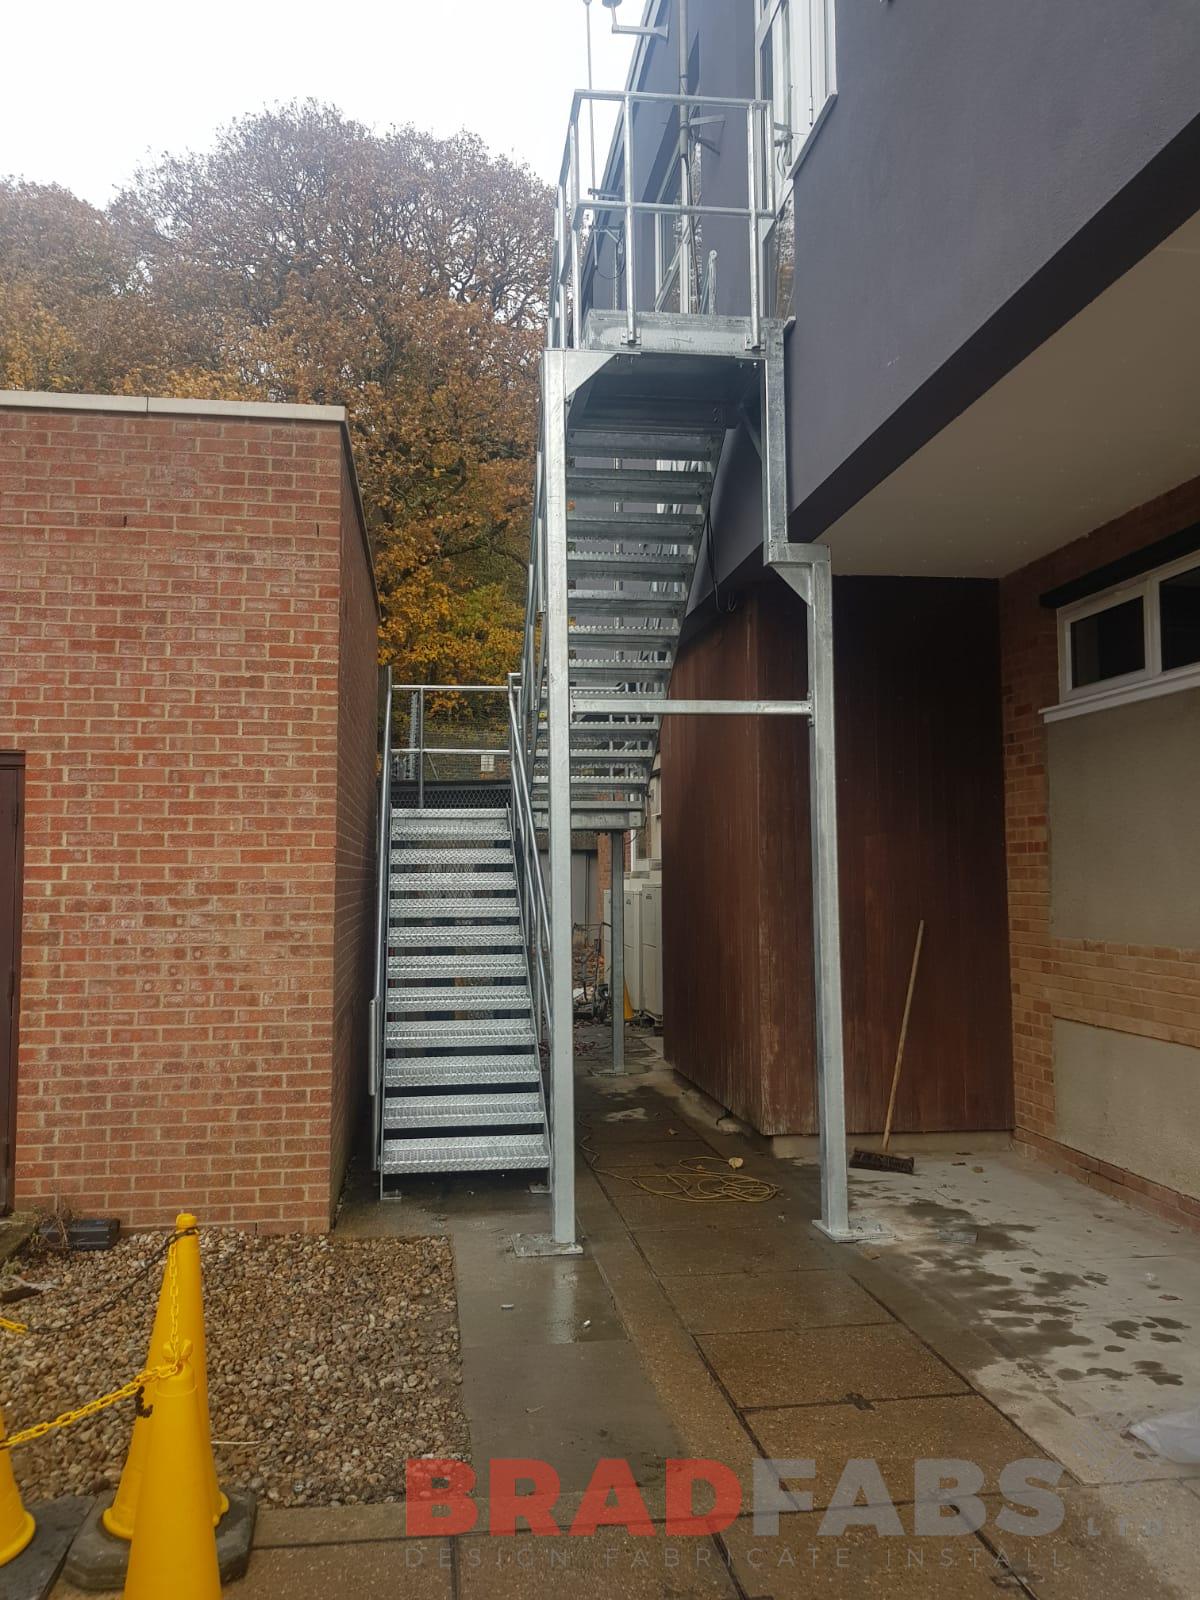 Substation galvanised external commercial Fire Escape Staircase by Bradfabs